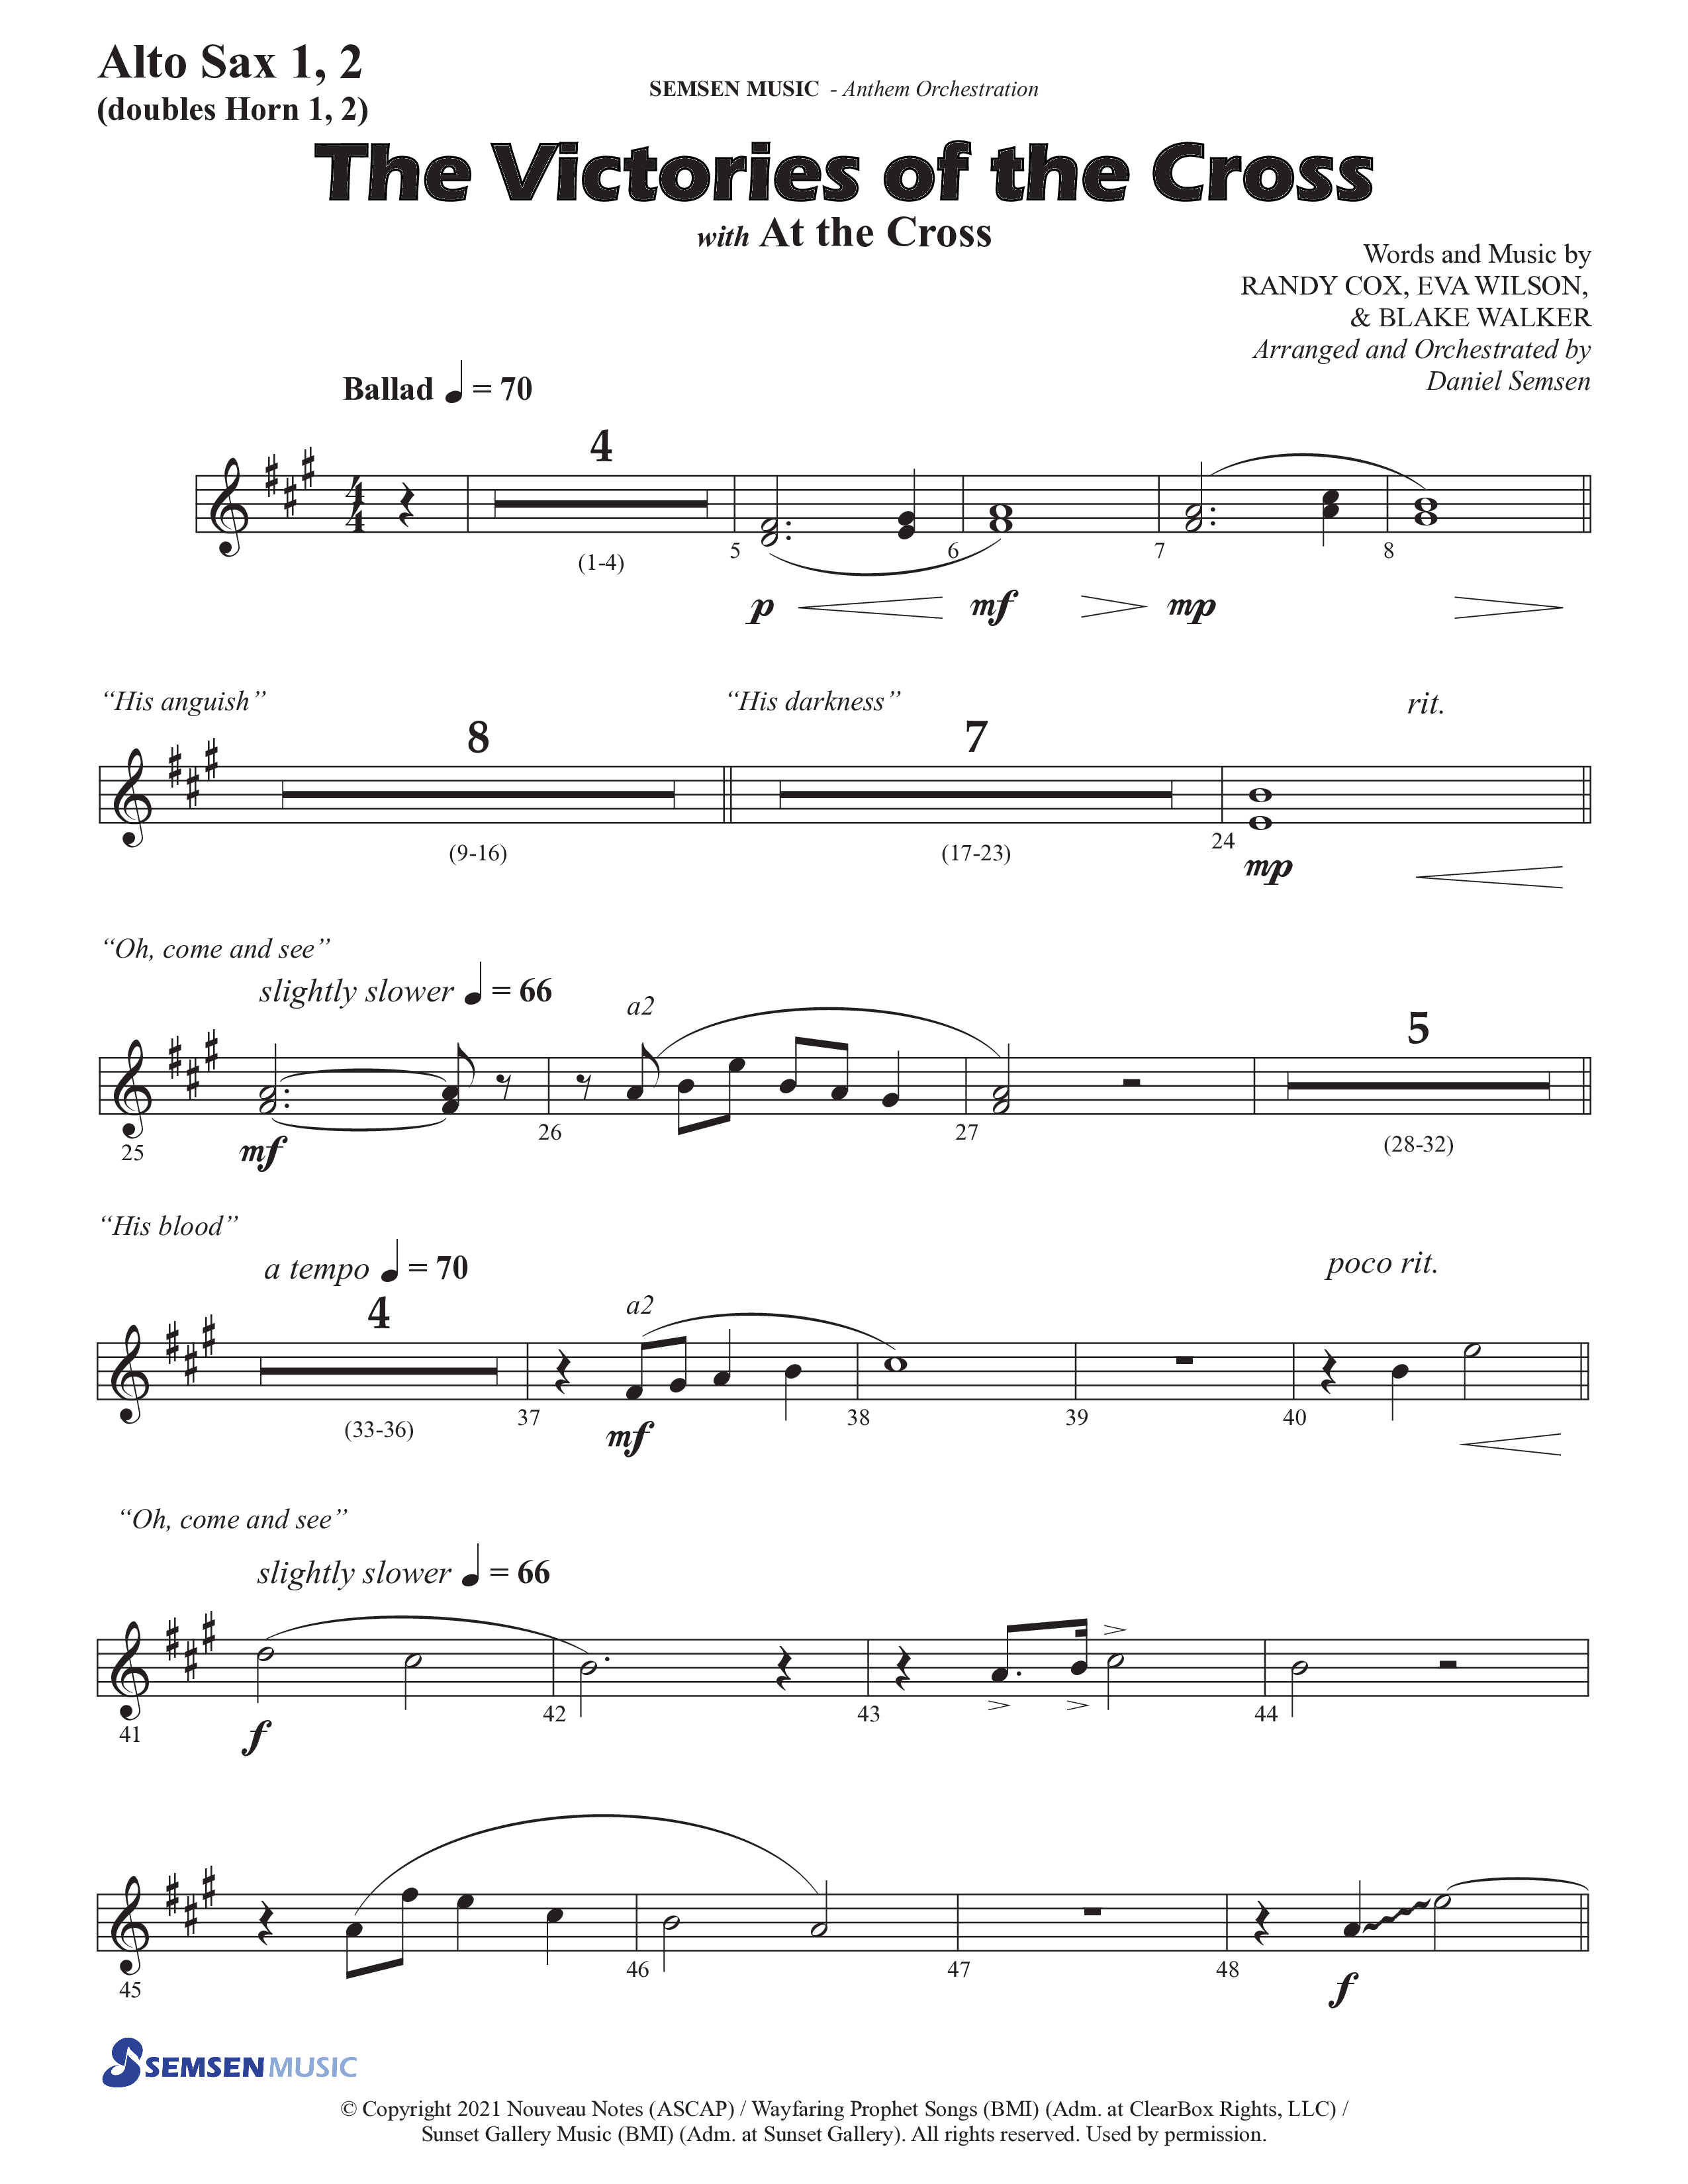 The Victories Of The Cross (with At The Cross) (Choral Anthem SATB) Alto Sax 1/2 (Semsen Music / Arr. Daniel Semsen)